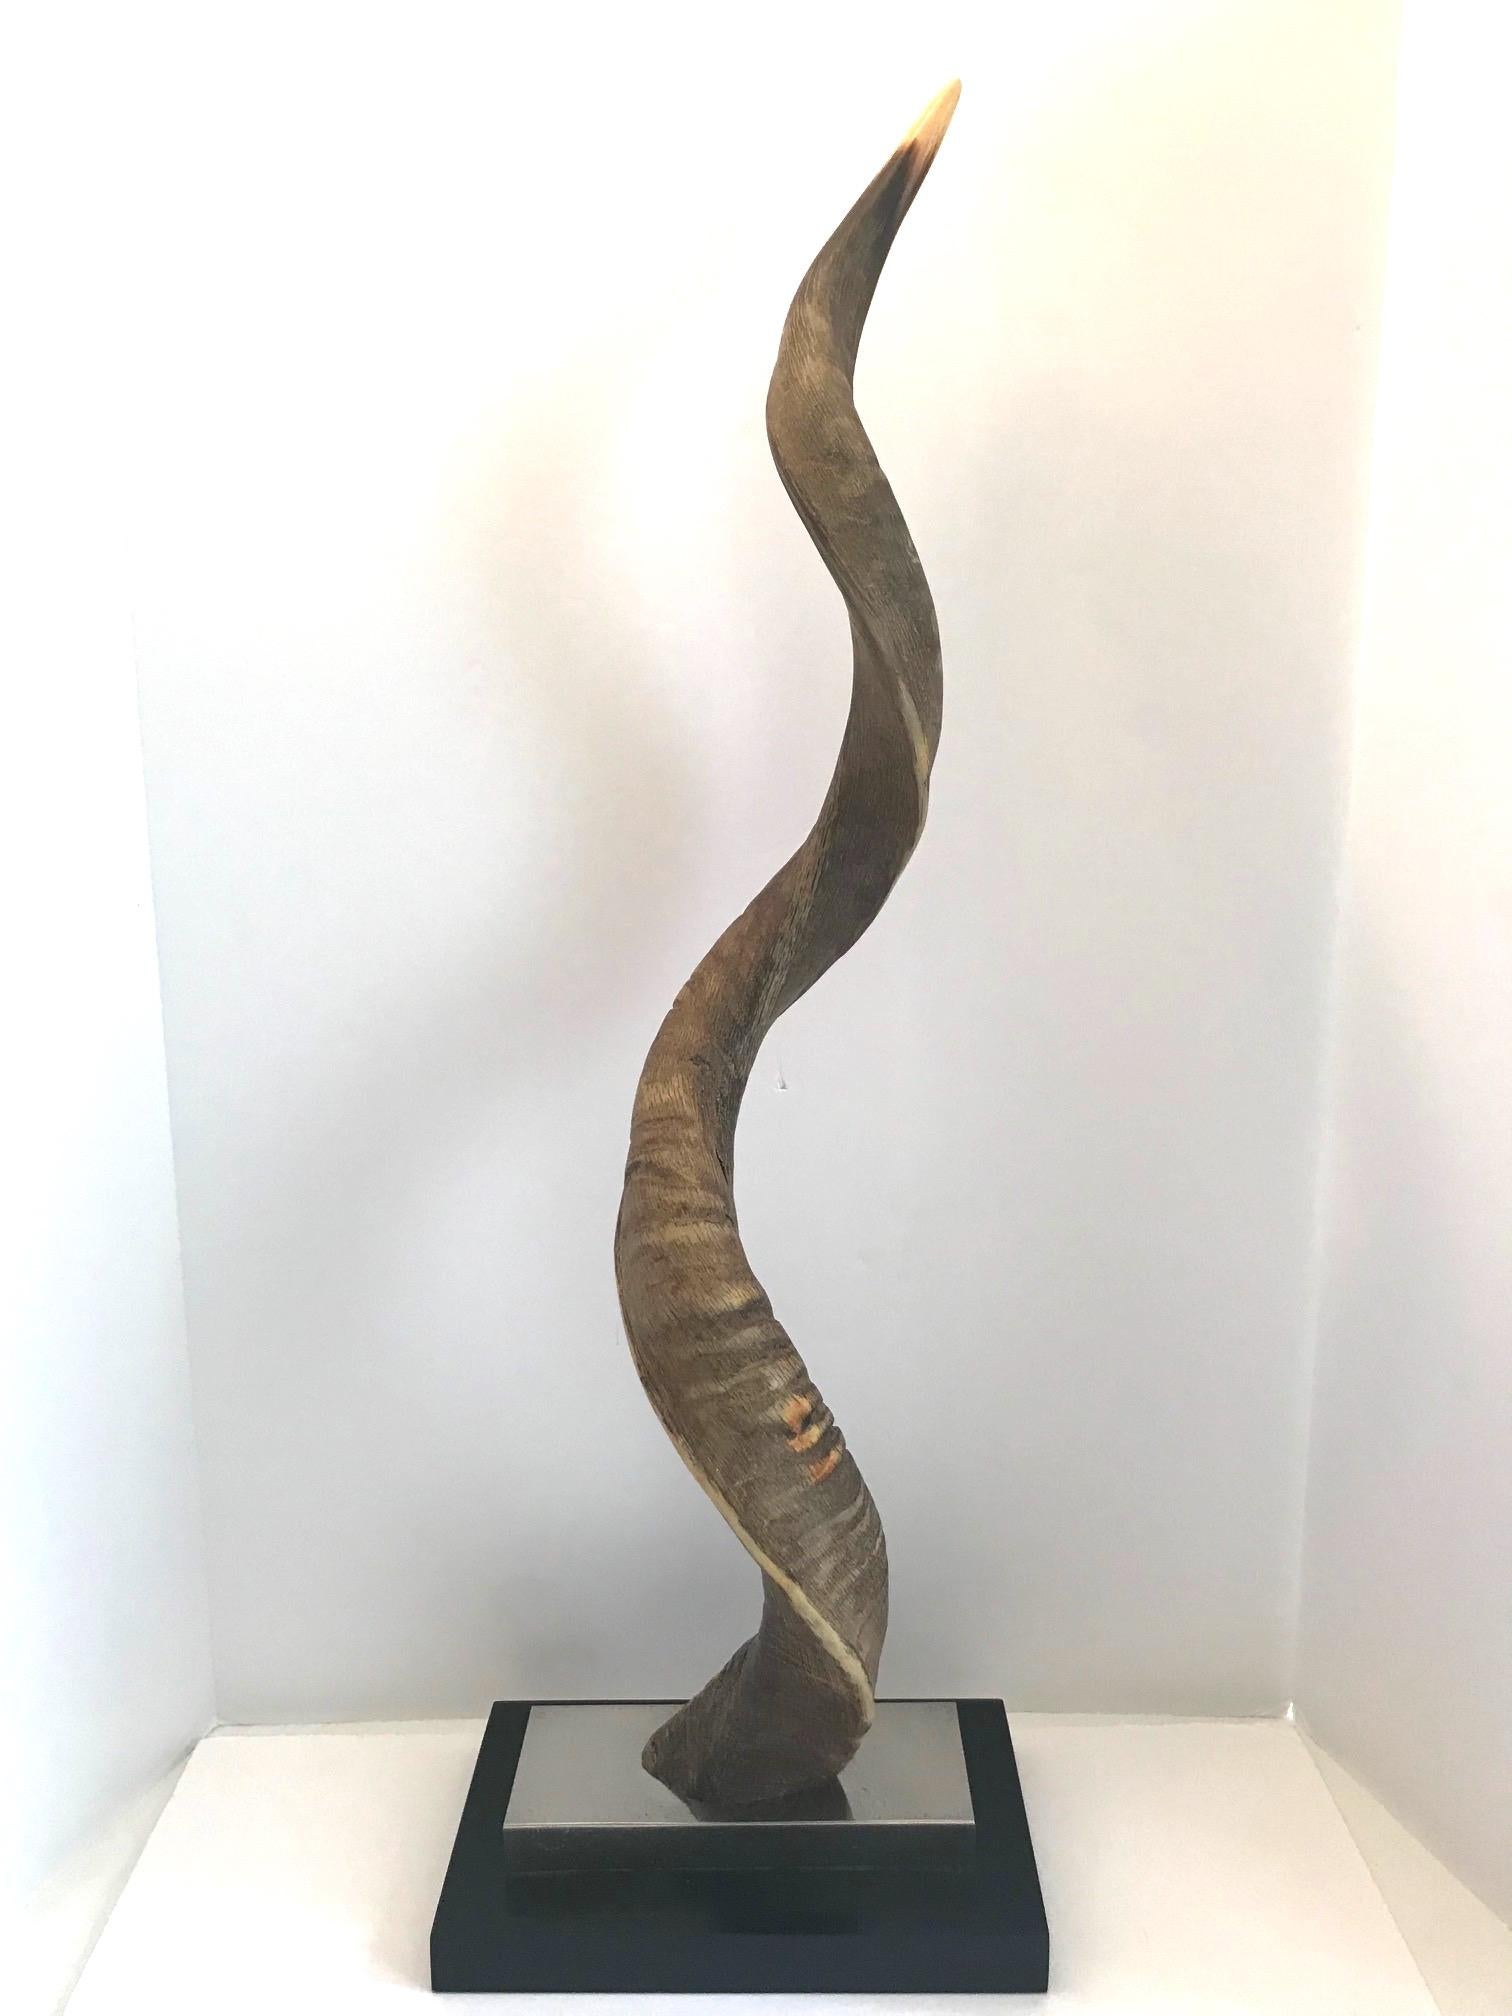 Exotic African Lesser Kudu horn sculpture mounted on stand. The sculpture has a stepped base design in chrome and black lacquered wood. Stunning from all angles.